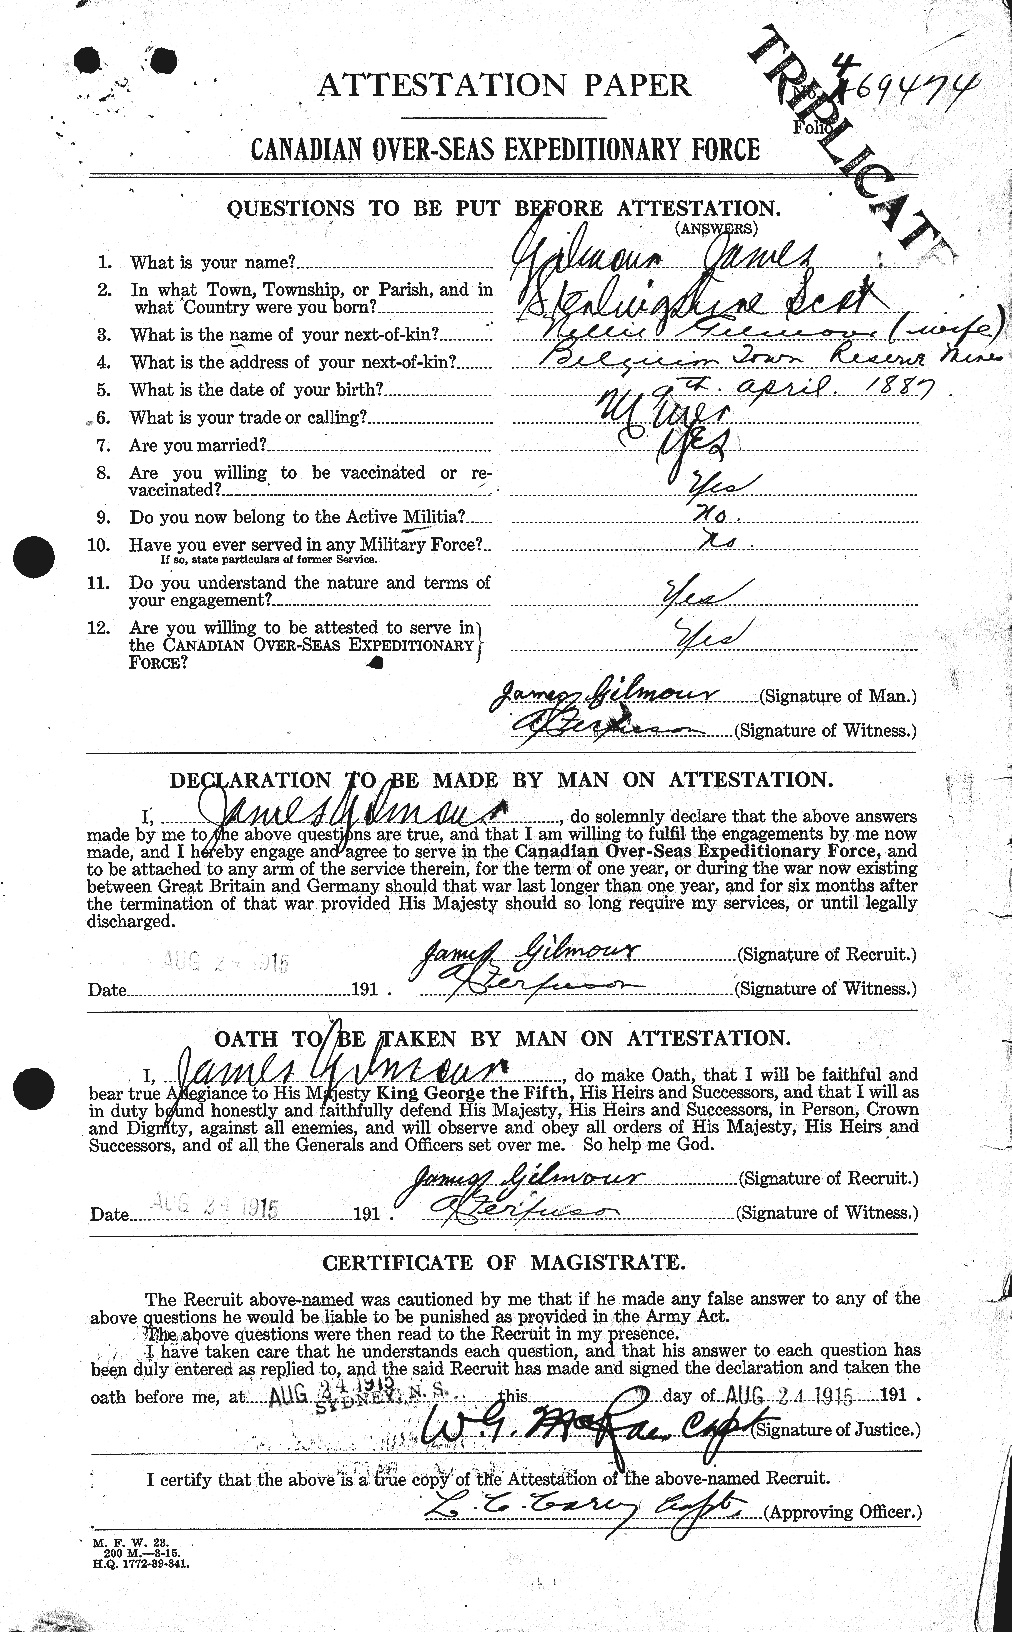 Personnel Records of the First World War - CEF 350958a